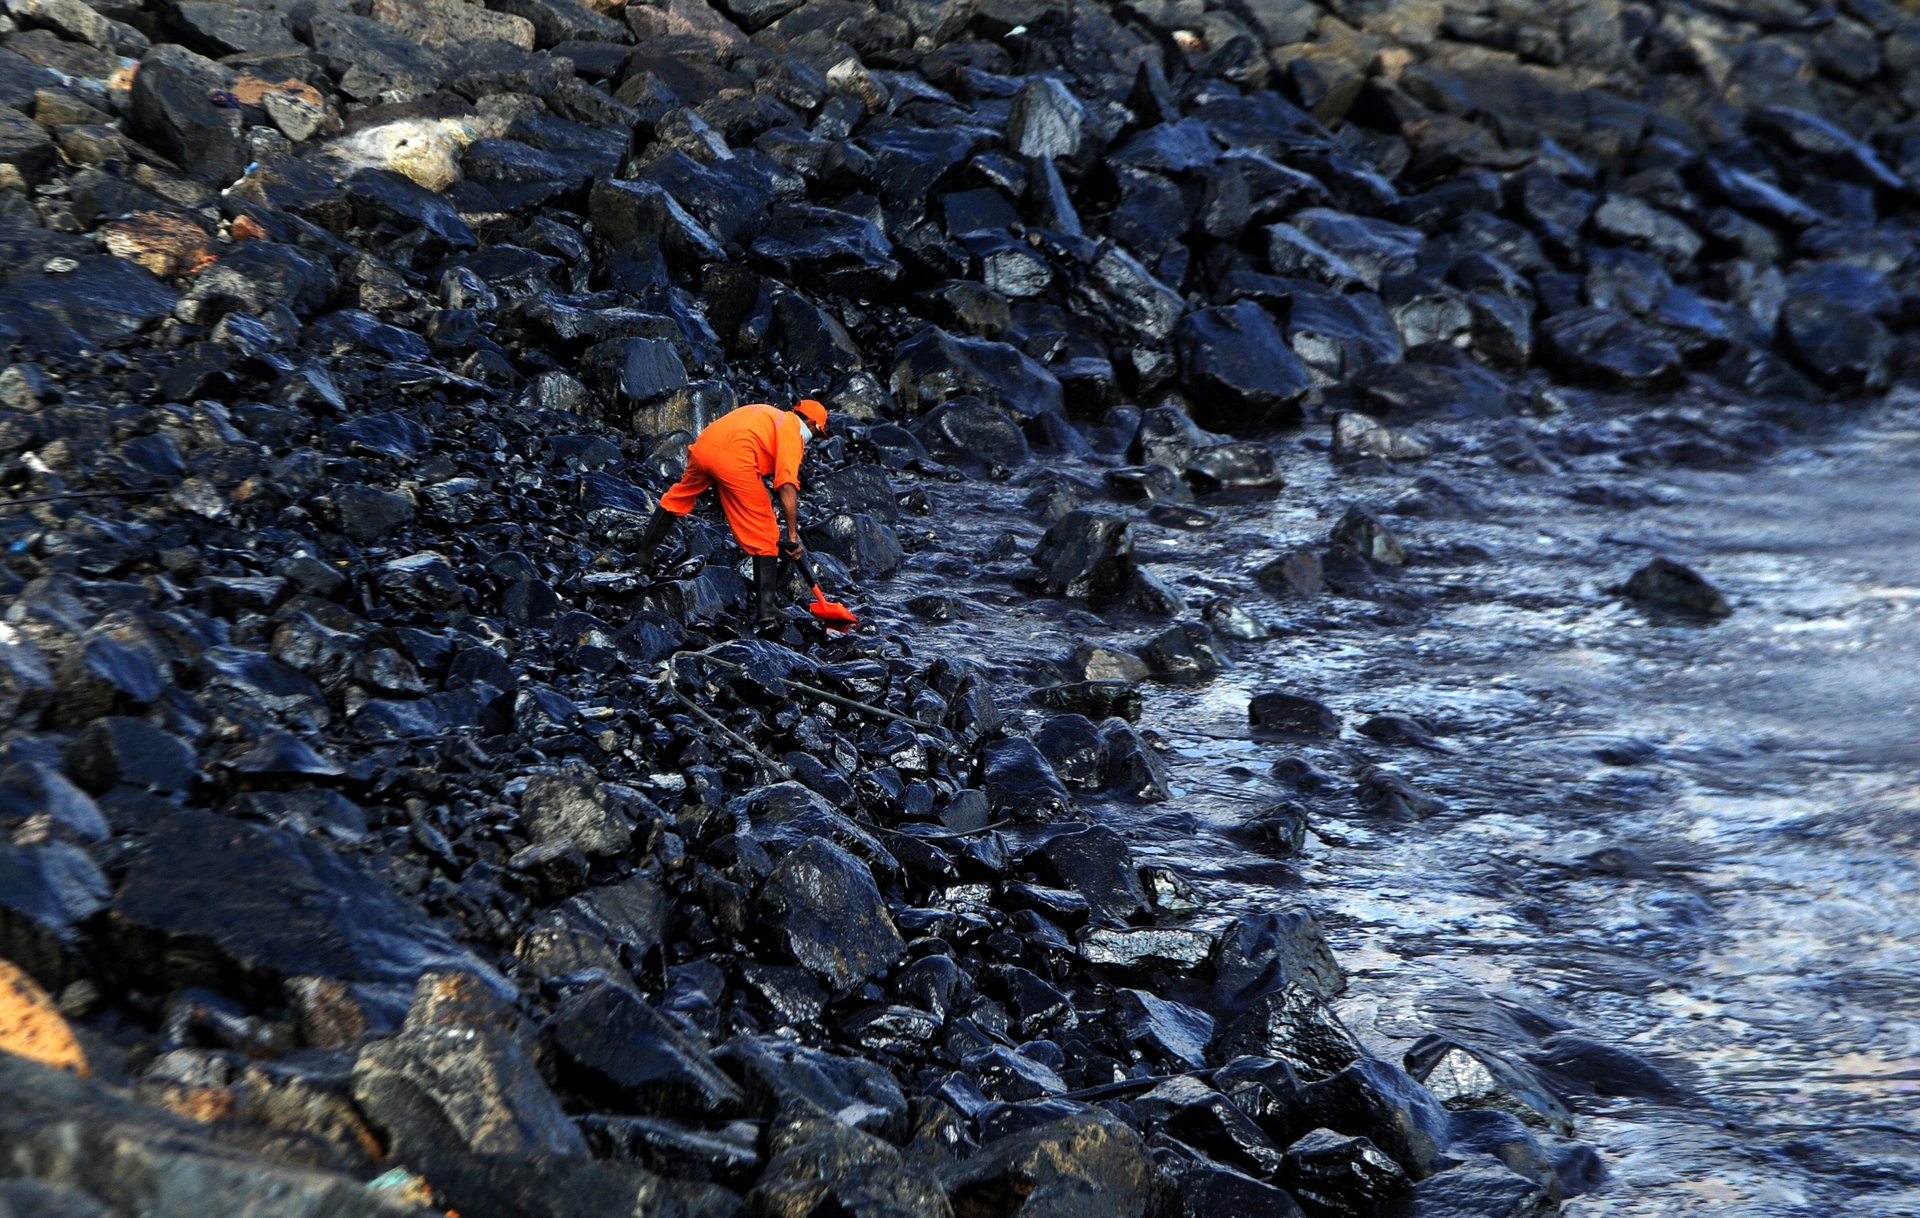 A member of the pollution response team collects a sample of the oil covering rocks at the sea edge after a spillage when two tankers collided off Kamarajar Port, Chennai, India. PHOTO: AFP